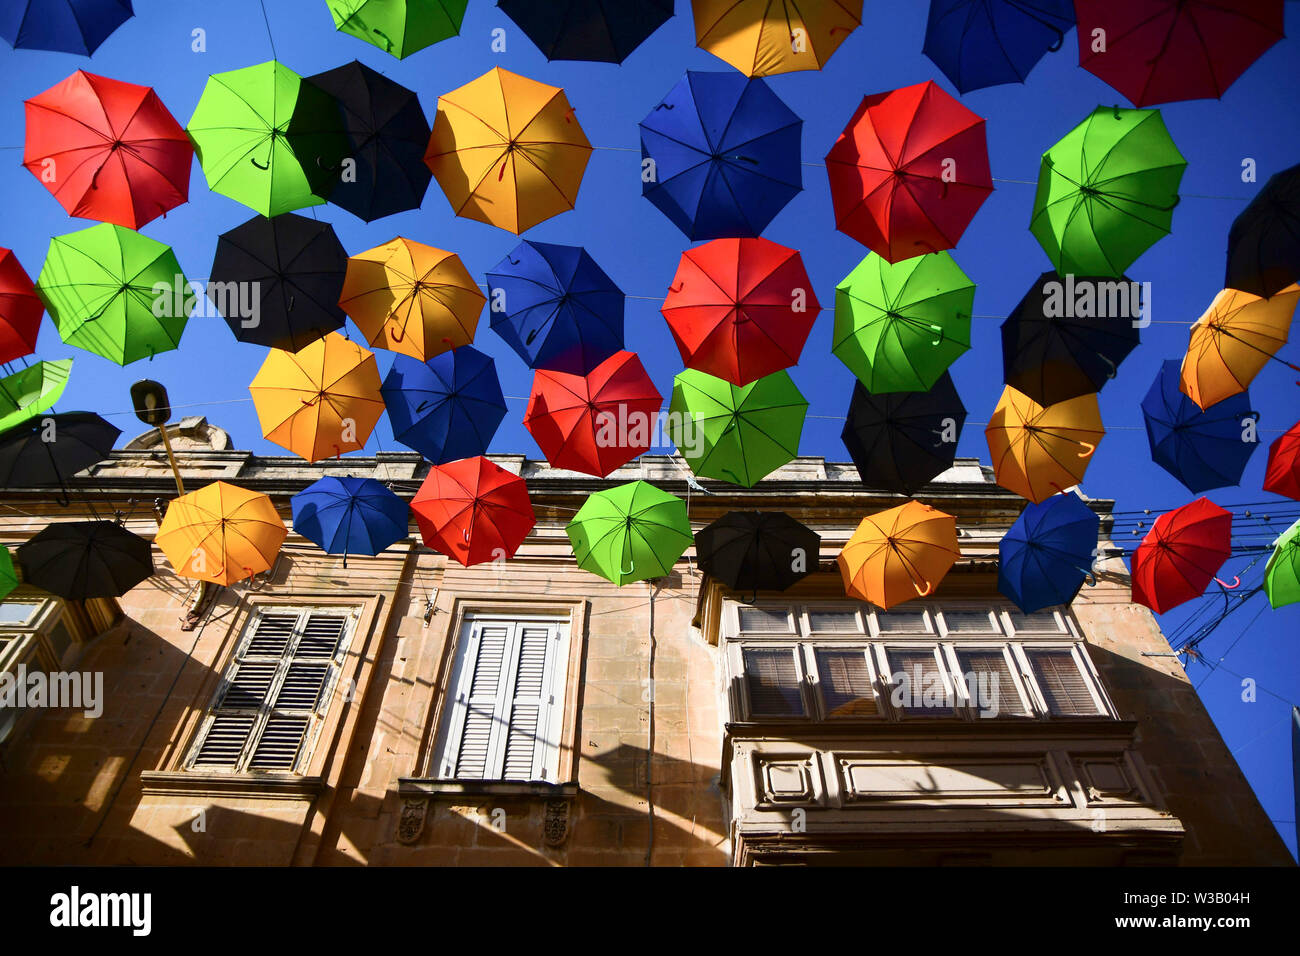 Zabbar. 13th July, 2019. Photo taken on July 13, 2019 shows umbrellas suspended in the air along a street to bring back the popular 'Umbrella Street' spectacle in Zabbar, Malta. Credit: Jonathan Borg/Xinhua/Alamy Live News Stock Photo